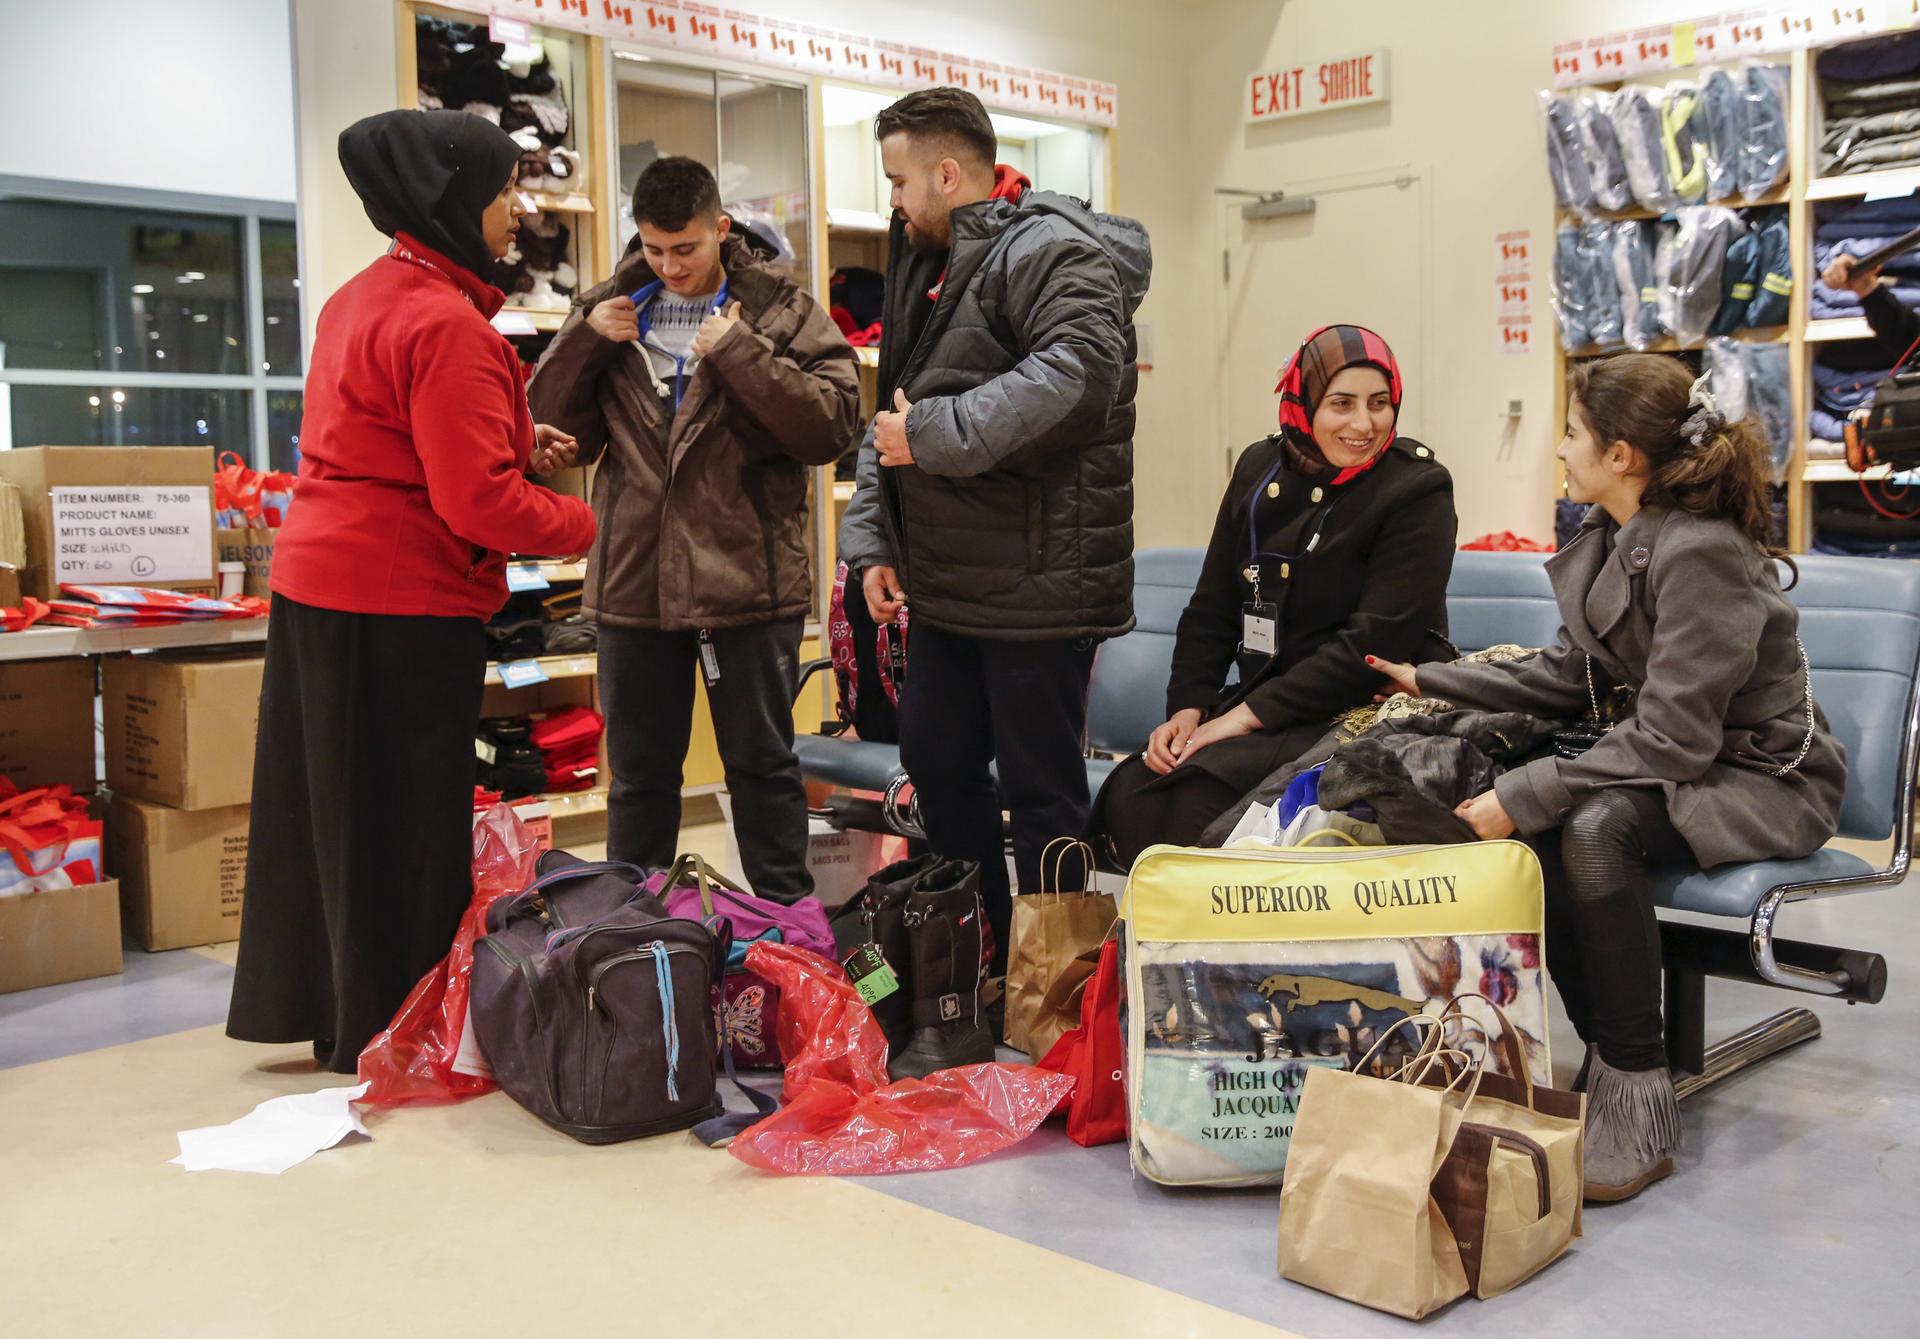 Syrian refugees receive winter clothing as they arrive at the Pearson Toronto International Airport in Mississauga, Ontario, December 18, 2015.